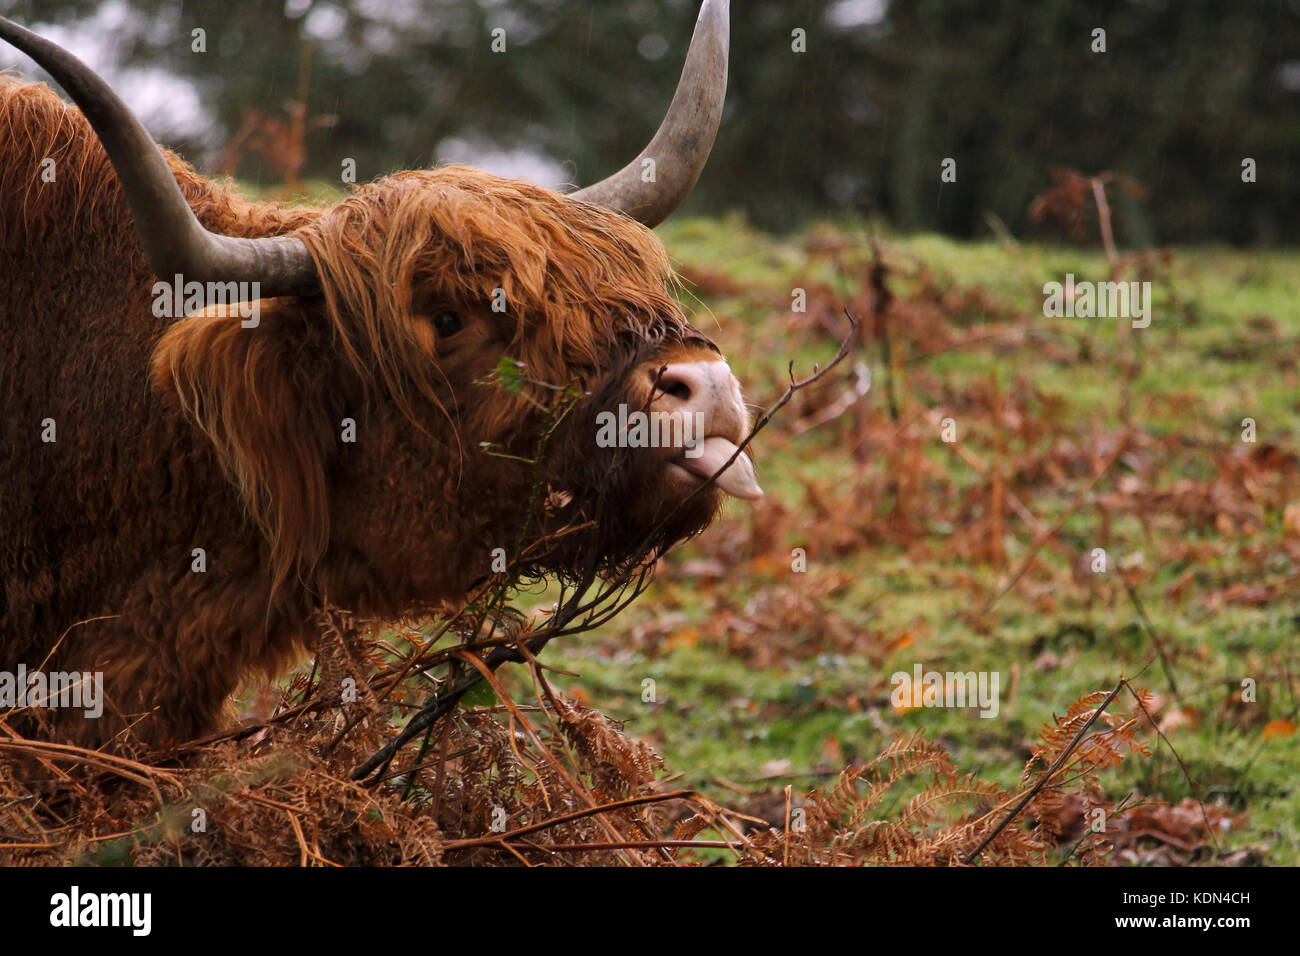 A highland cow sticking its tongue out in Loch Lomond, Scotland Stock Photo